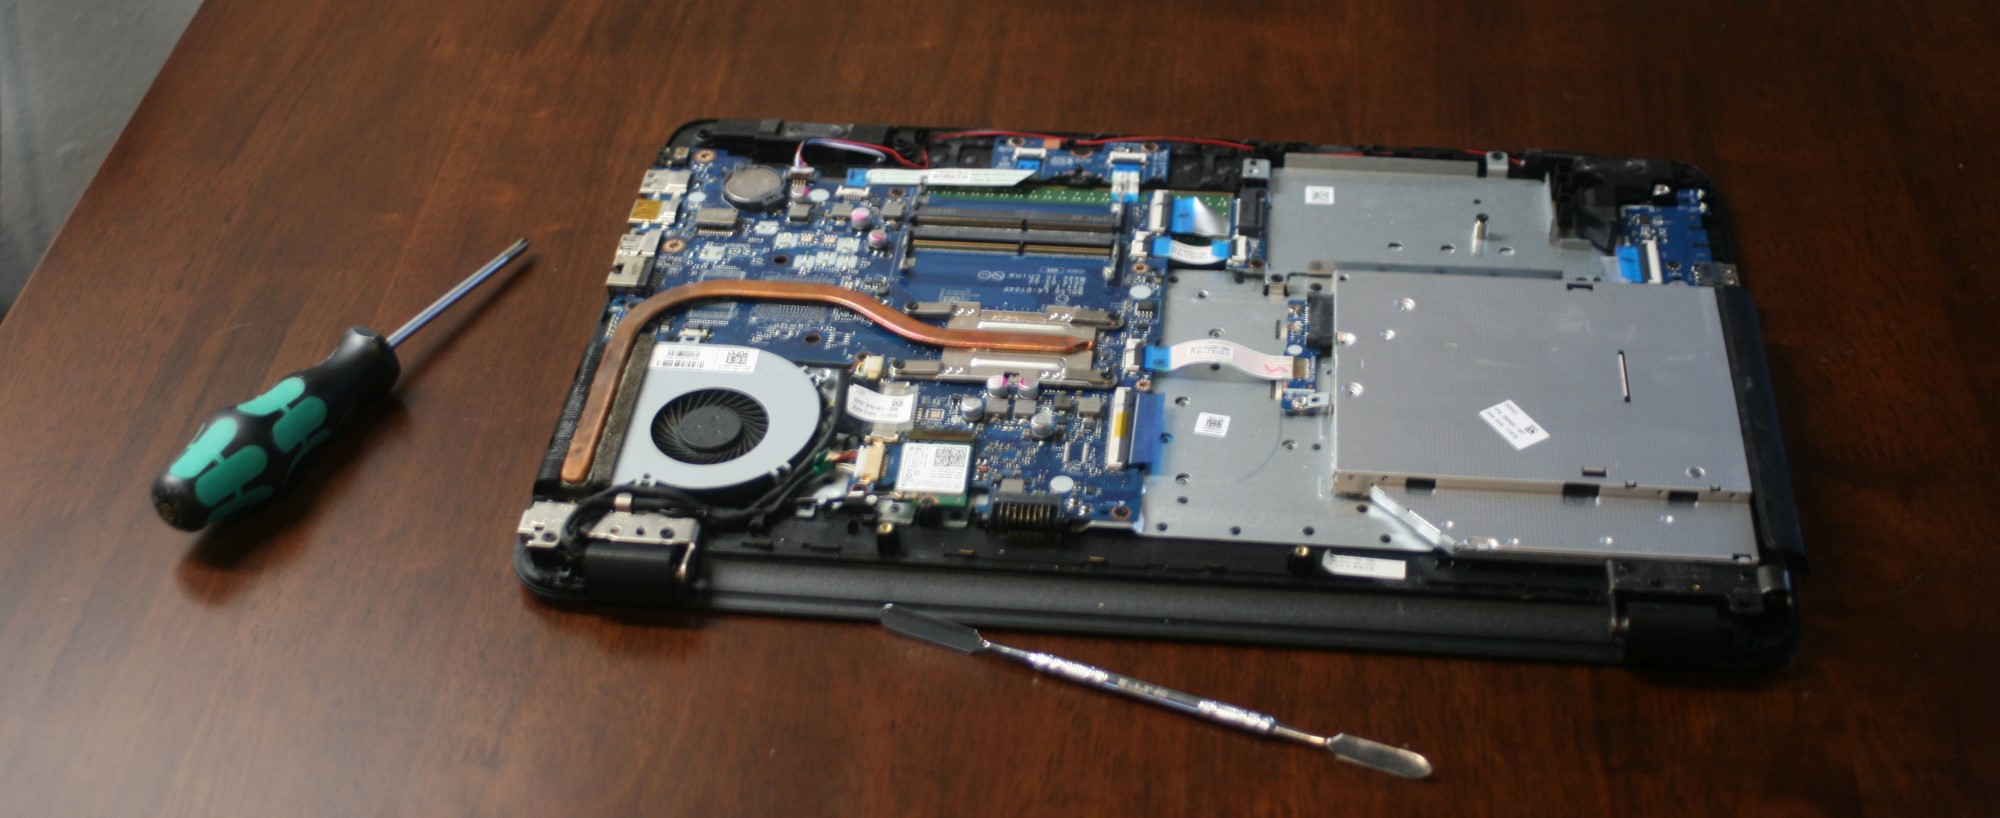 Laptop with back cover off and screwdriver on the table